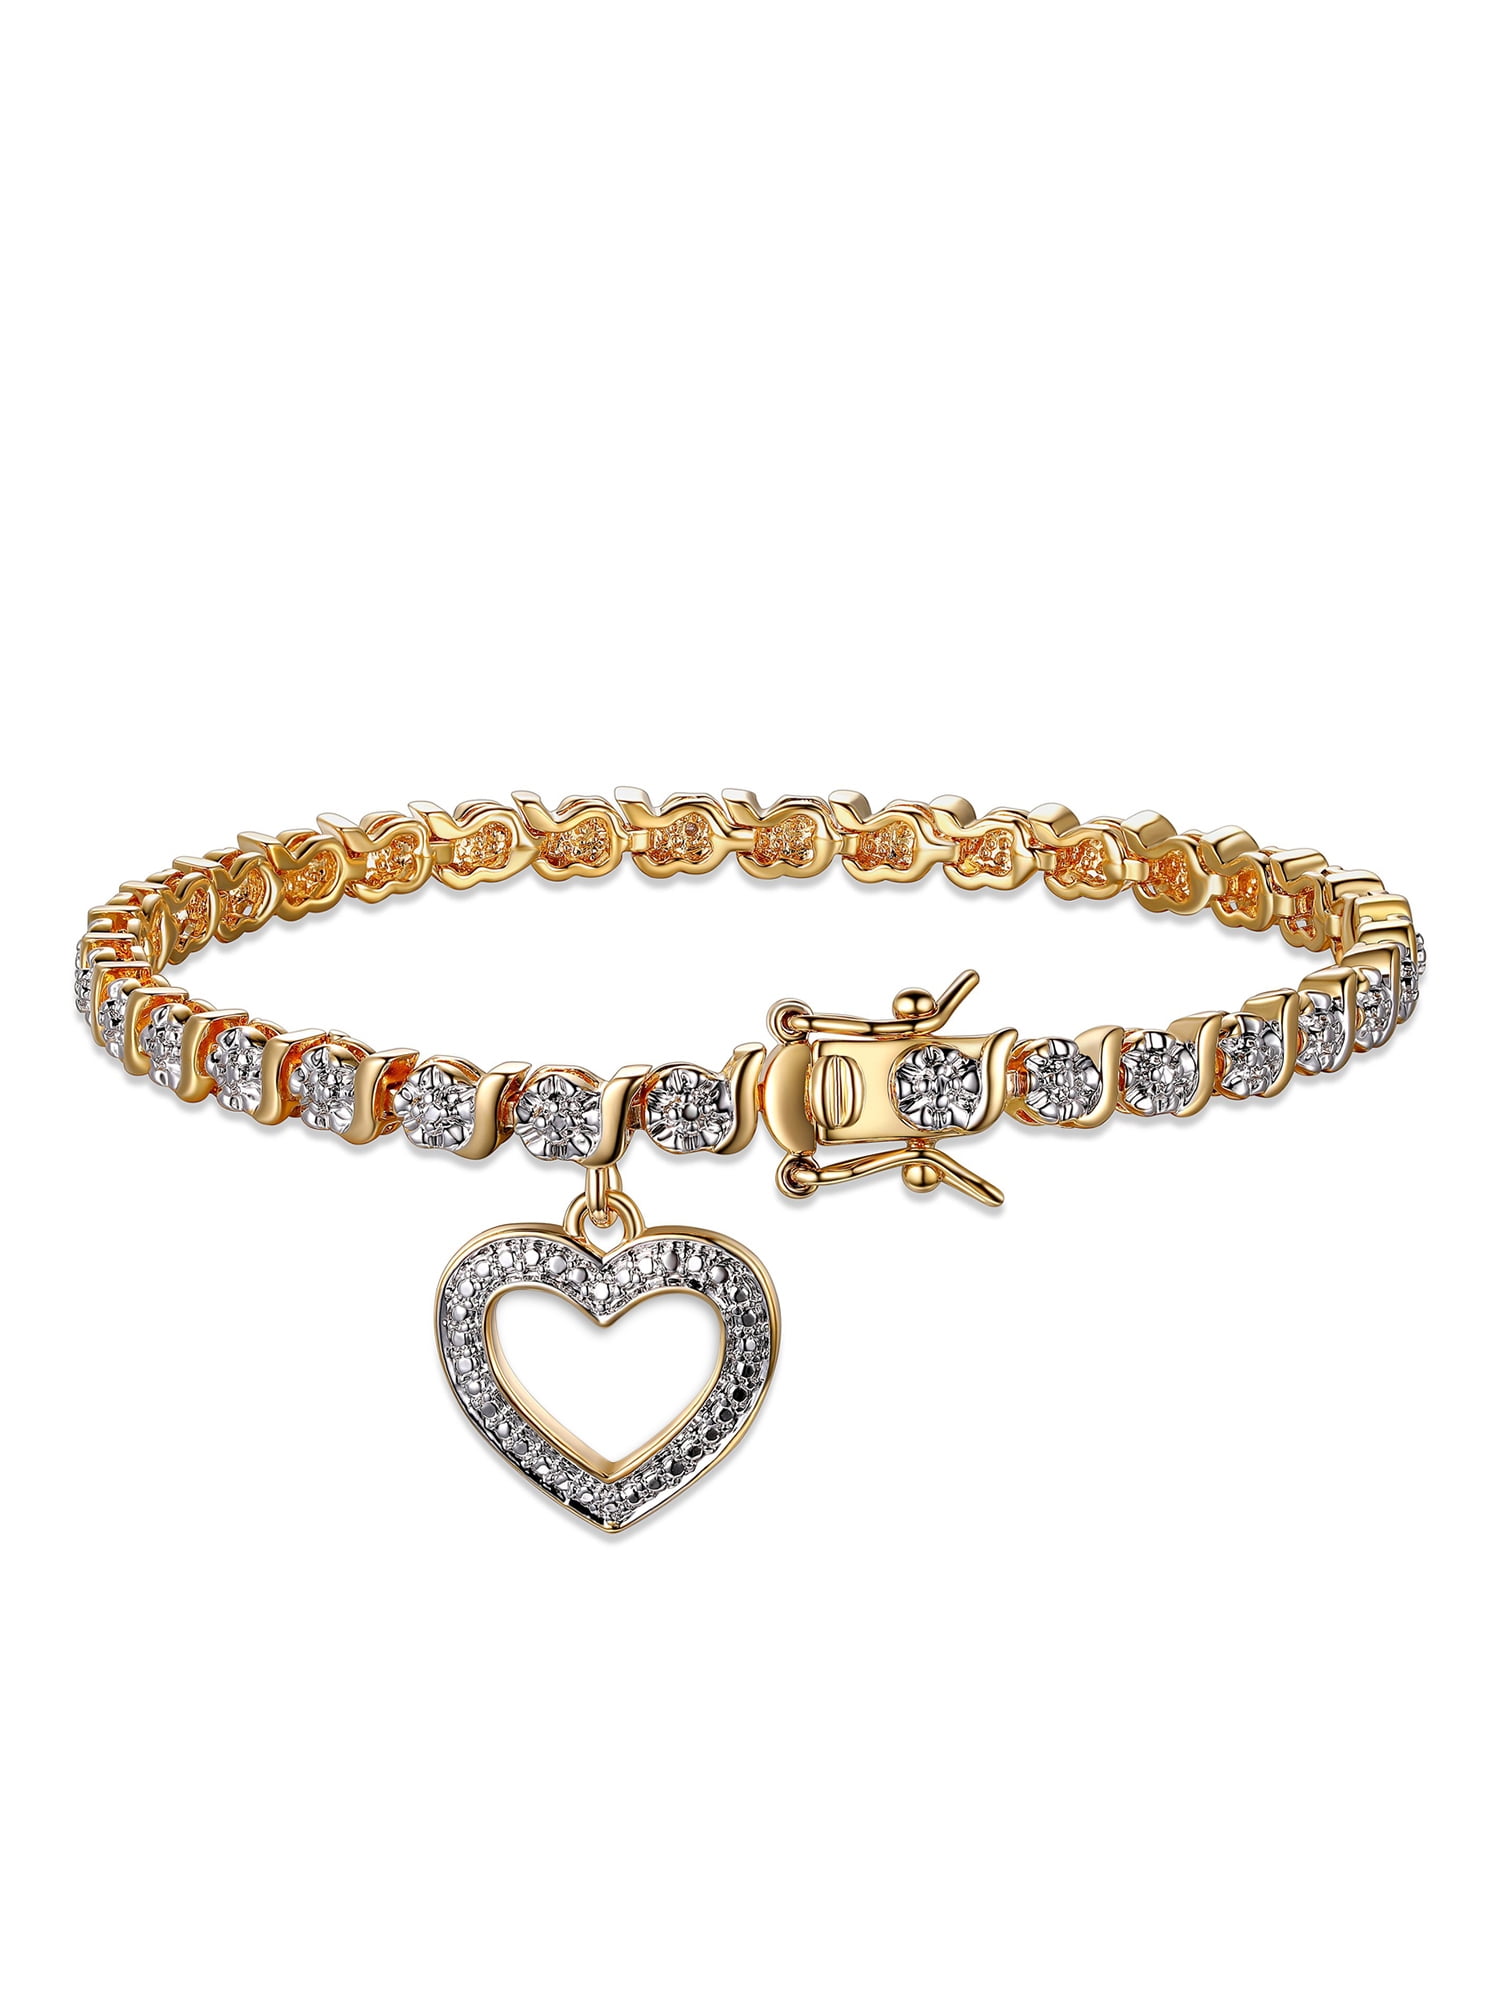 Inspirational Bracelets With Meaning  Heart O Gold